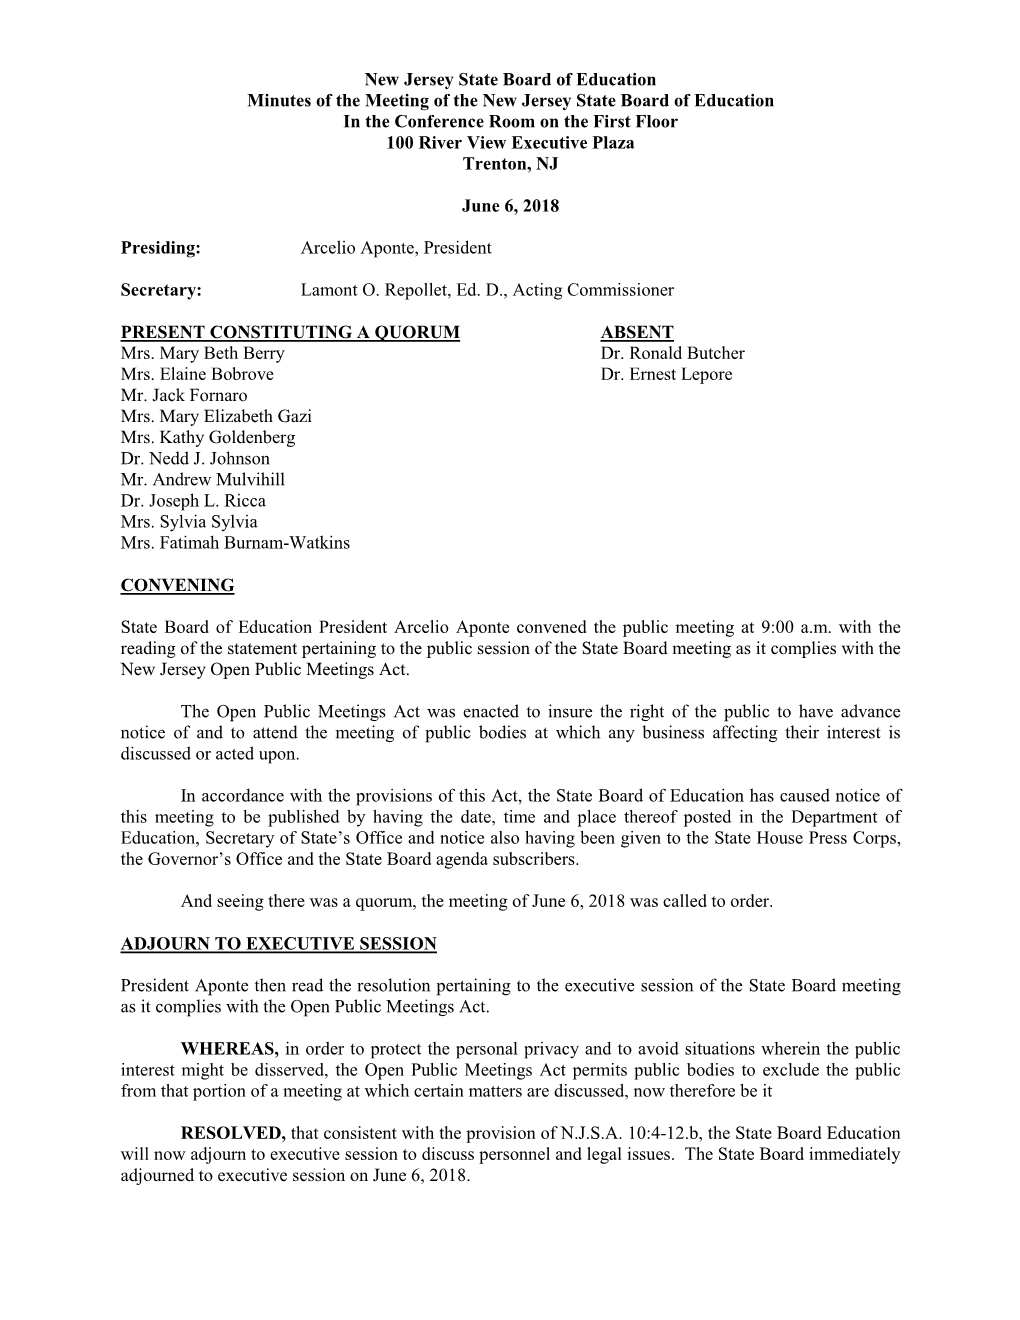 New Jersey State Board of Education Minutes of the Special Meeting Of